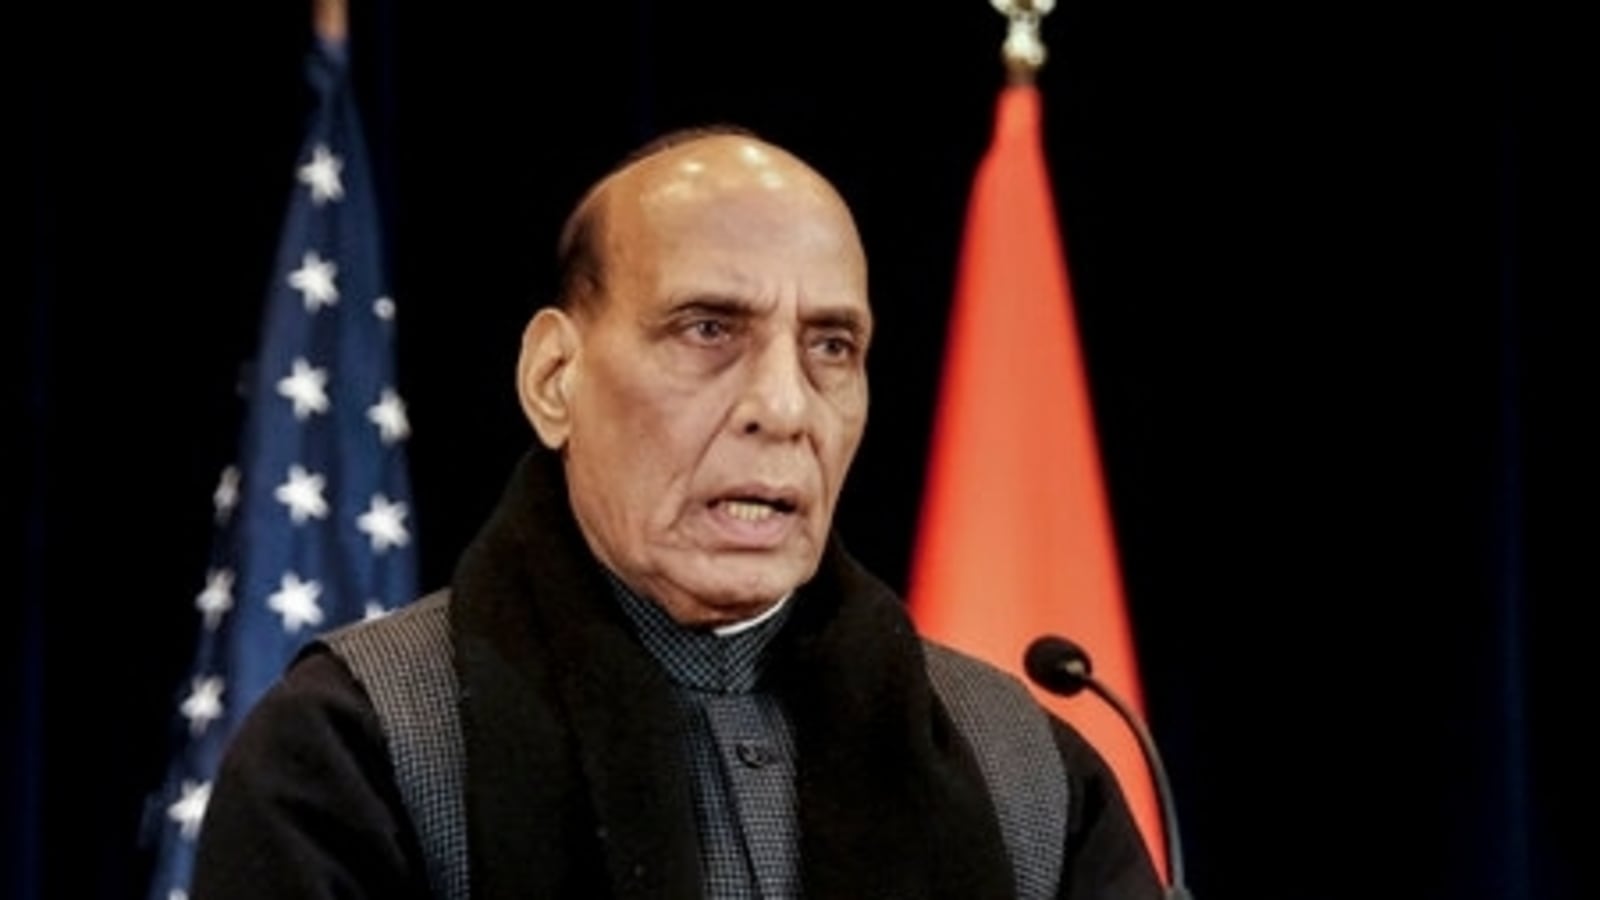 Evening brief: Rajnath Singh issues tough warning to terrorists, and all the latest news